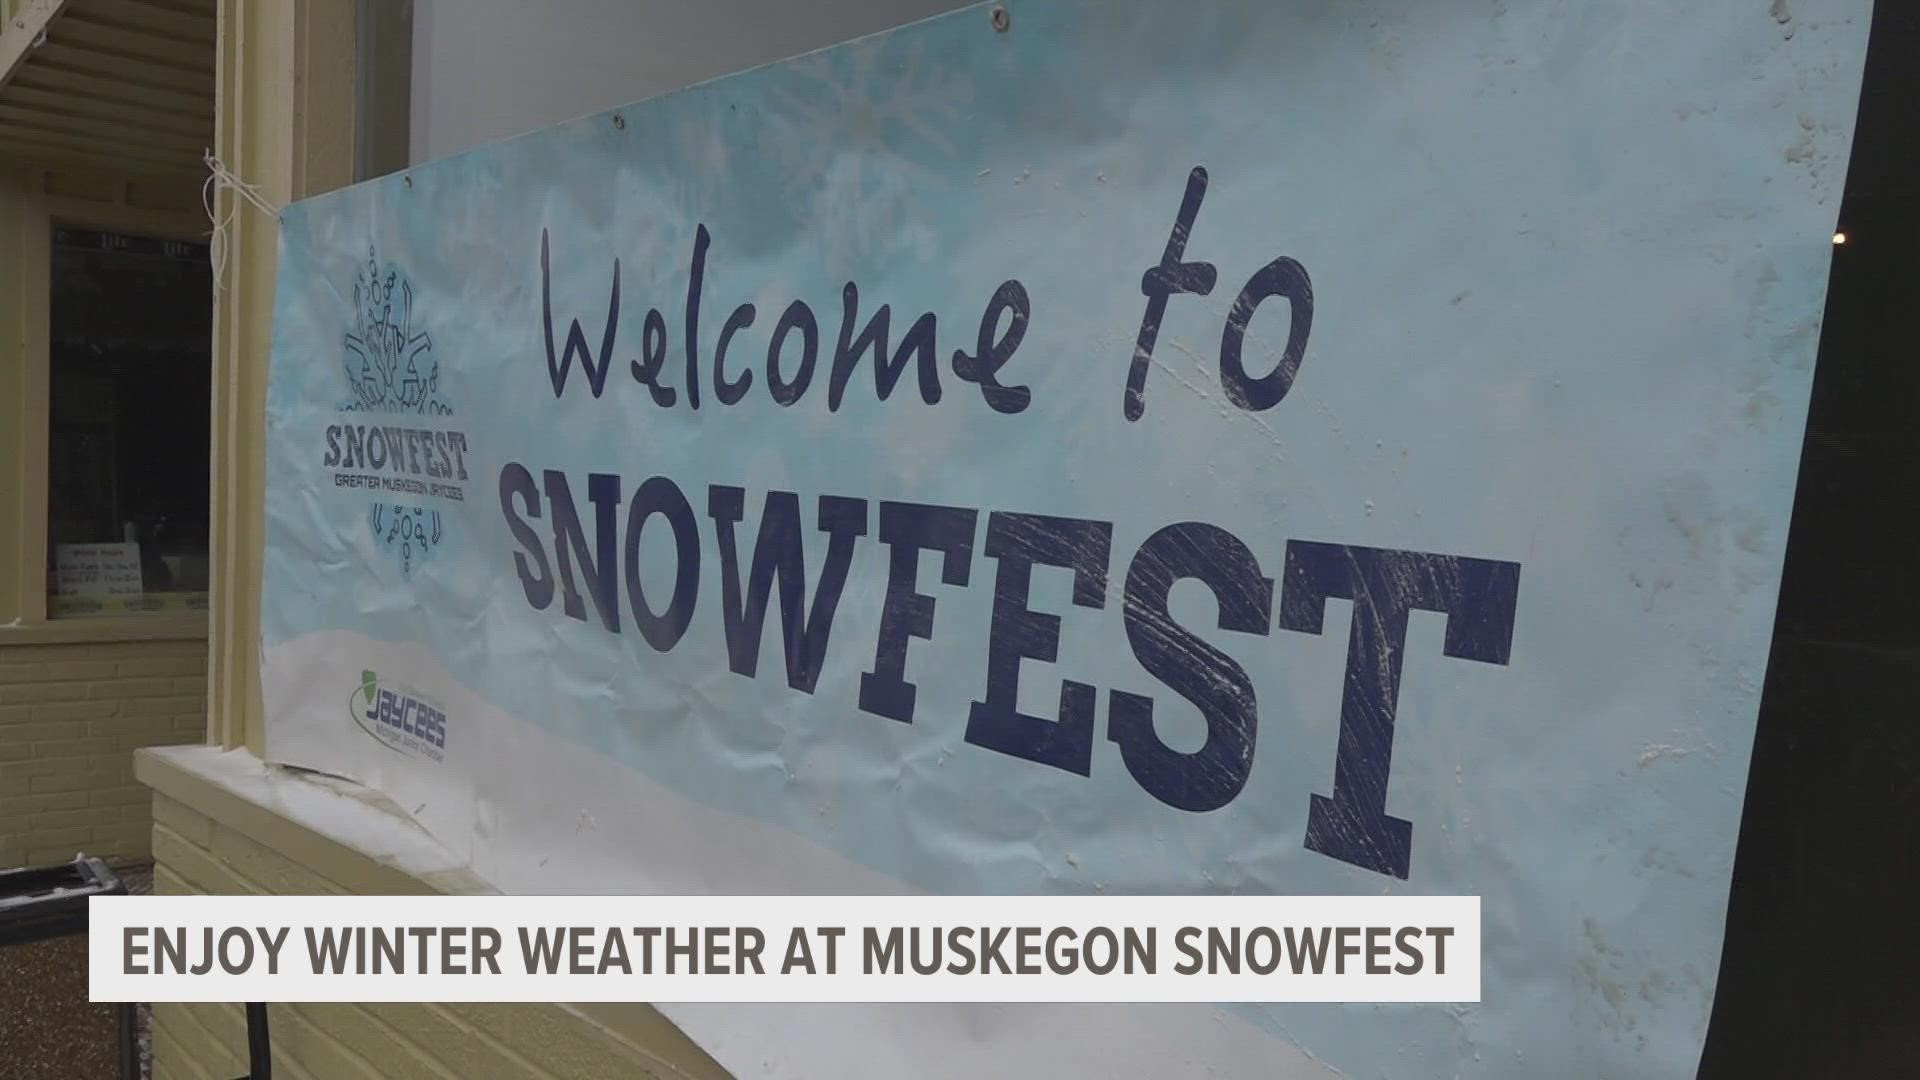 With more snow heading to West Michigan, this weekend will be perfect to enjoy the annual Muskegon Snowfest.